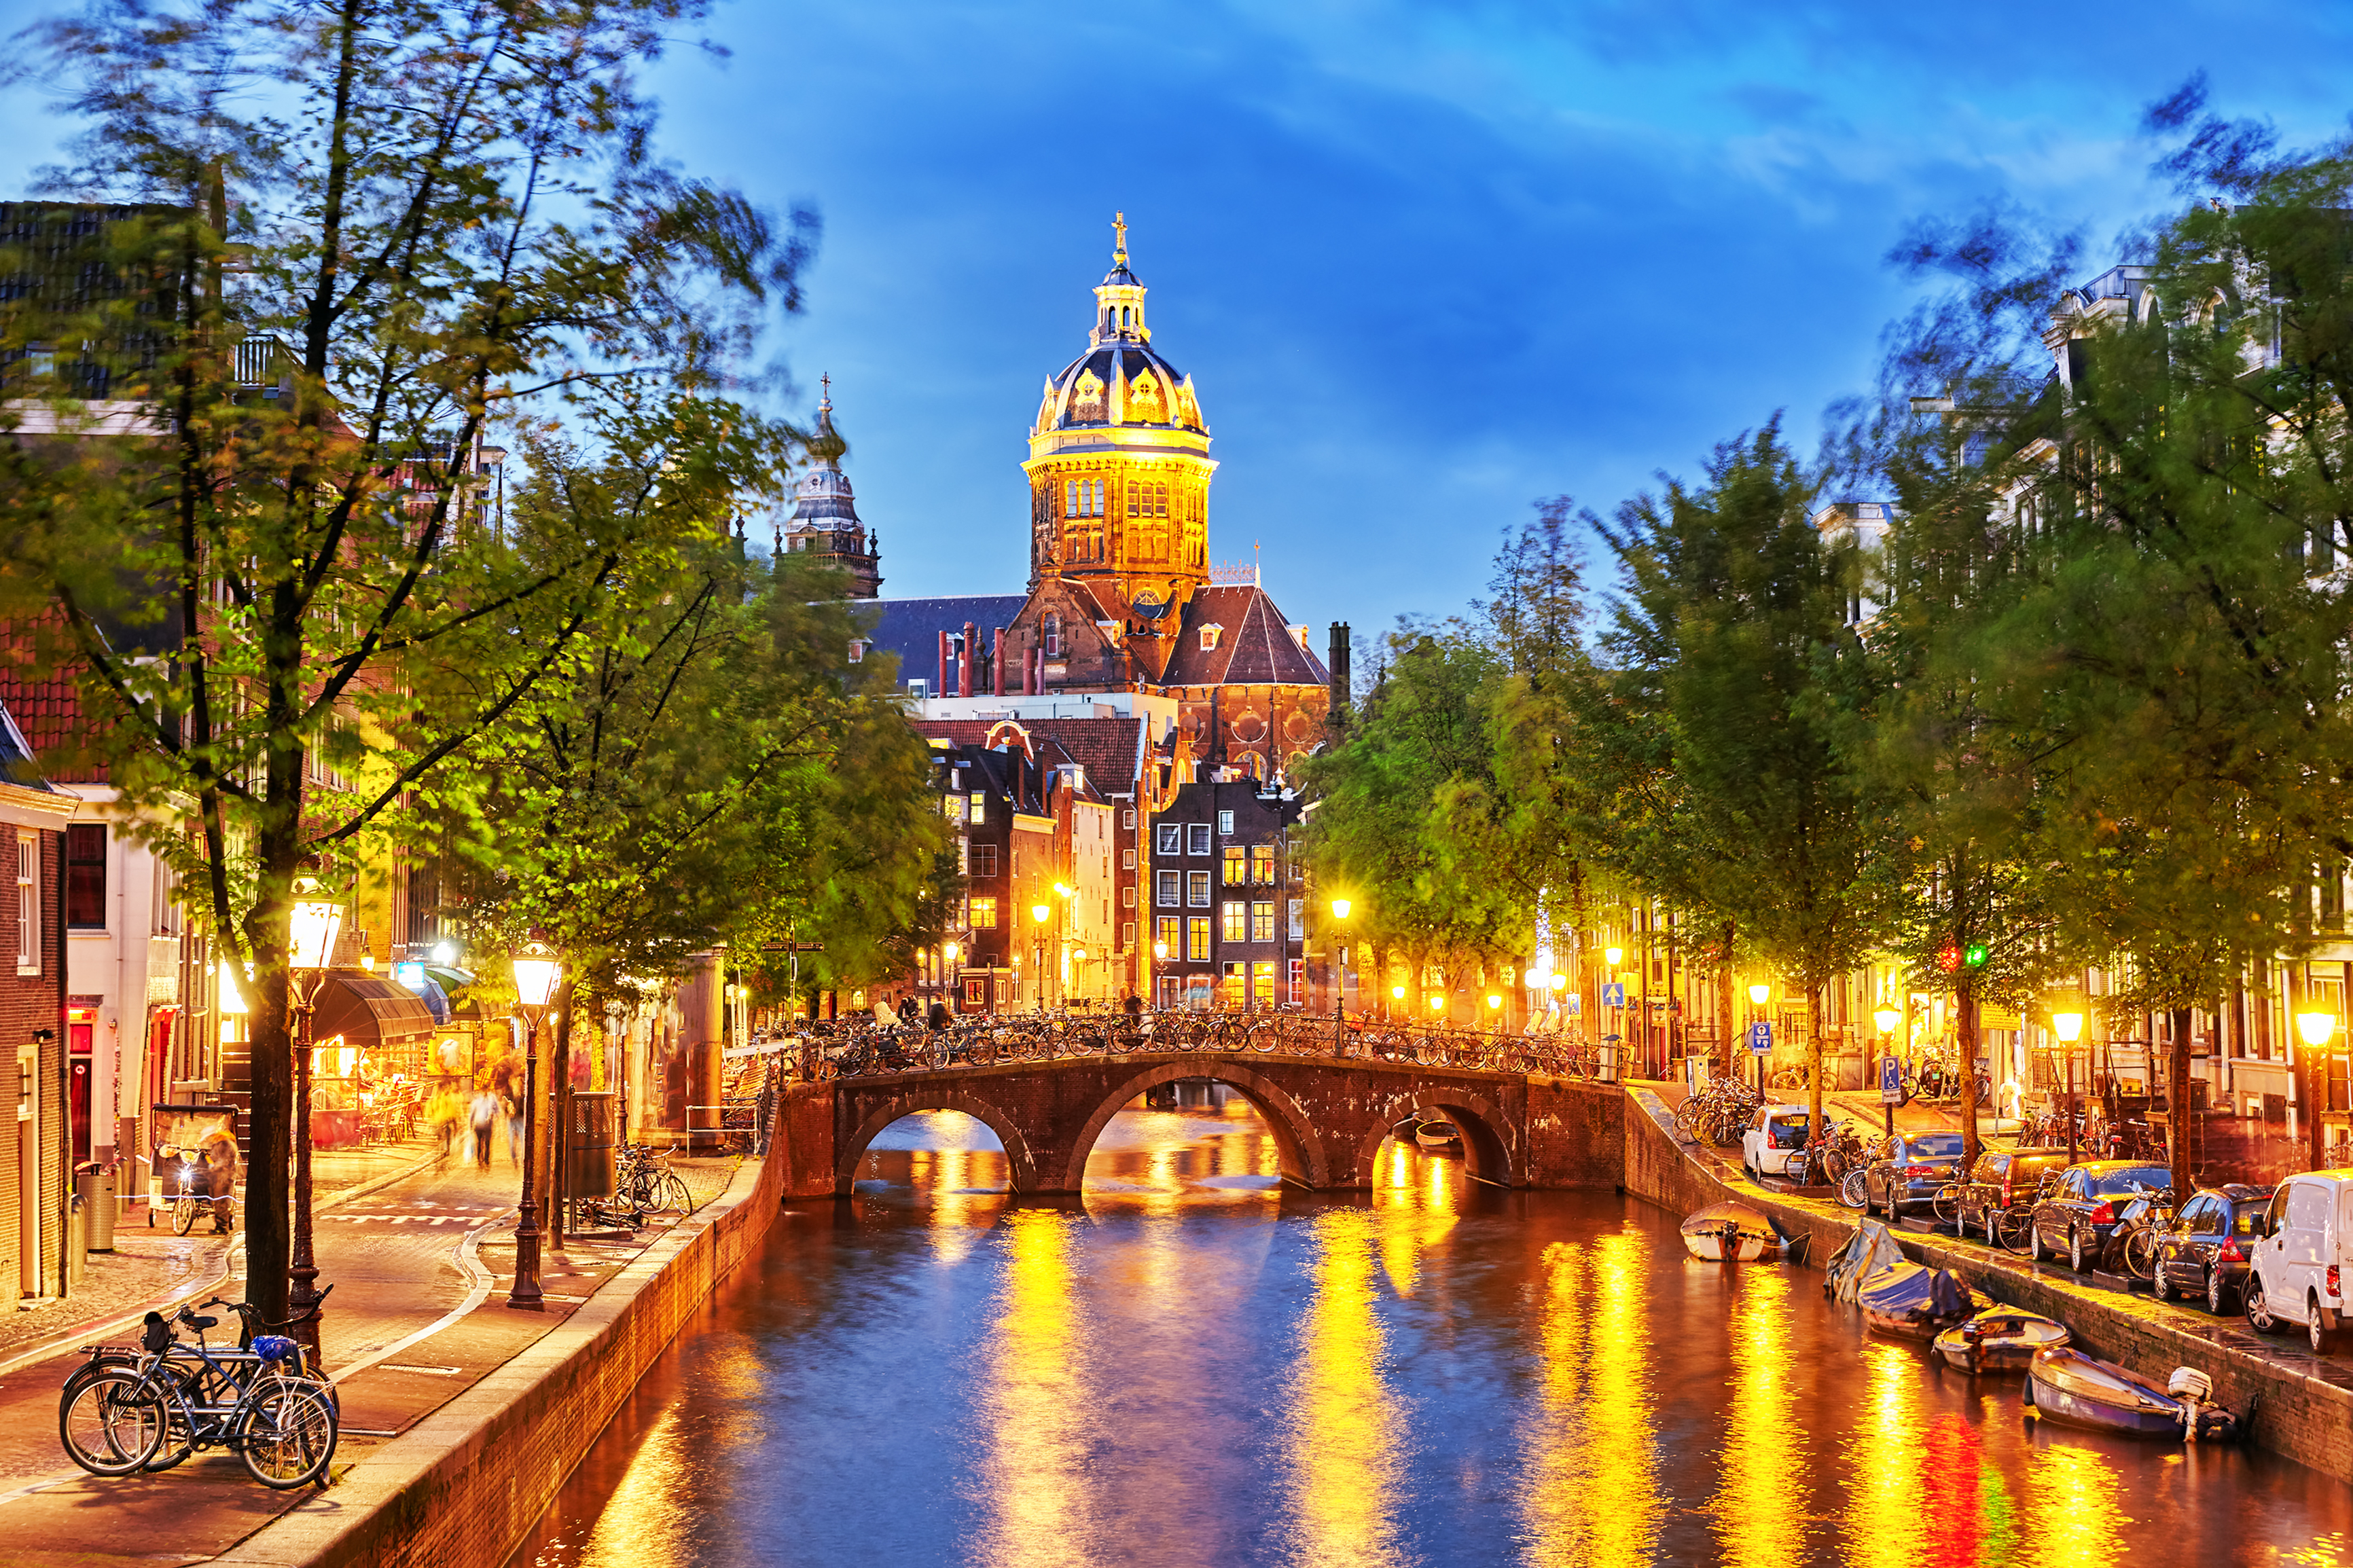 Flights to Amsterdam in the $400s round-trip!